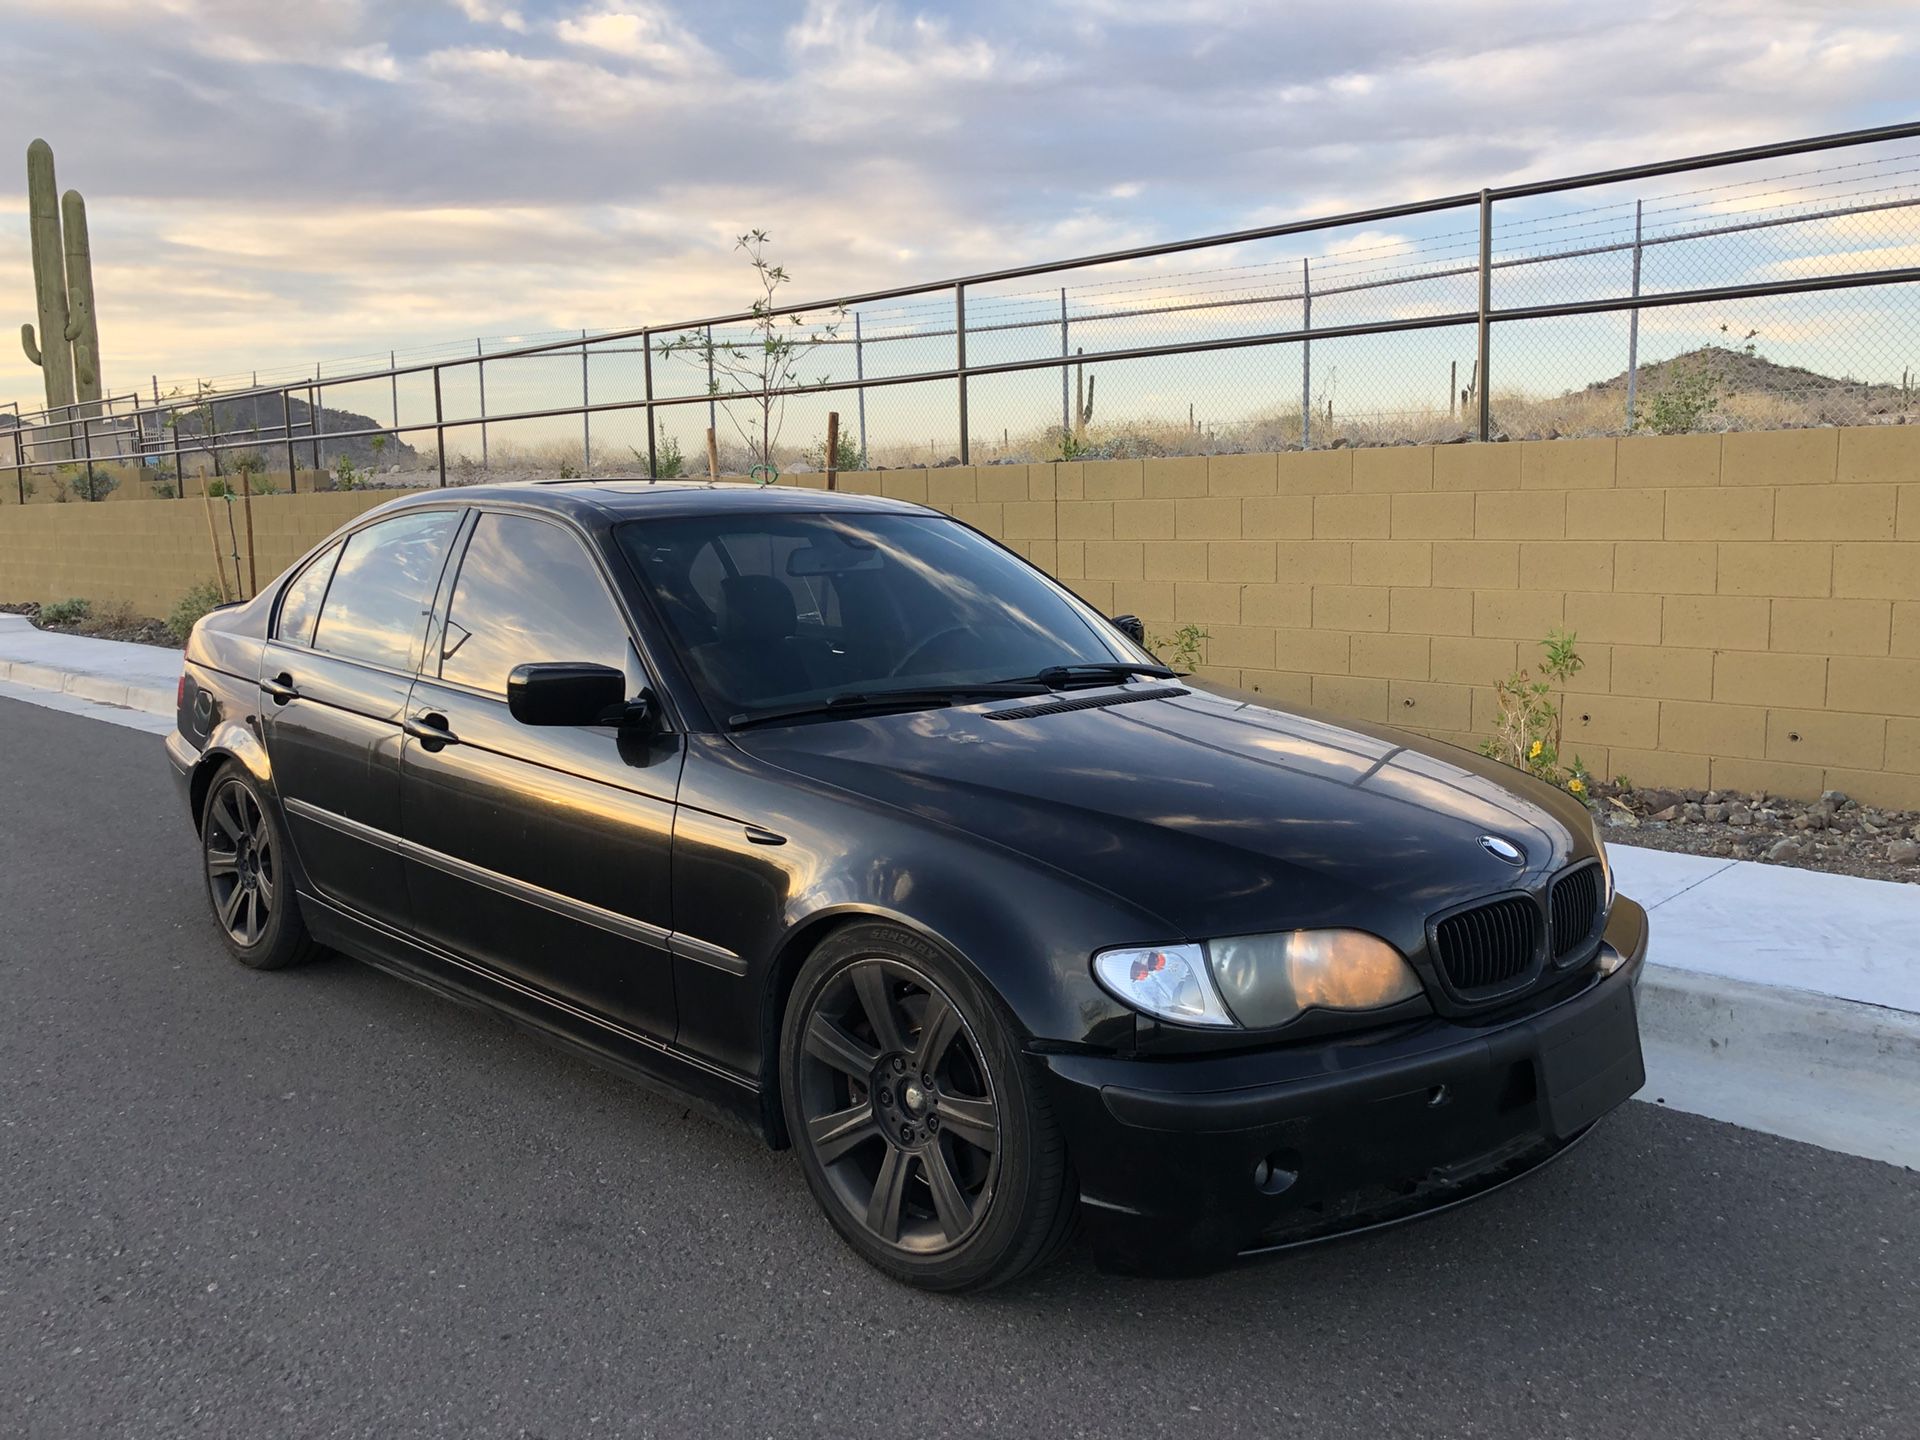 2004 BMW 330I ZHP E46 Black Great Driver M3 Sedan Auto Cheap Daily for sale or for trade bmw bimmer